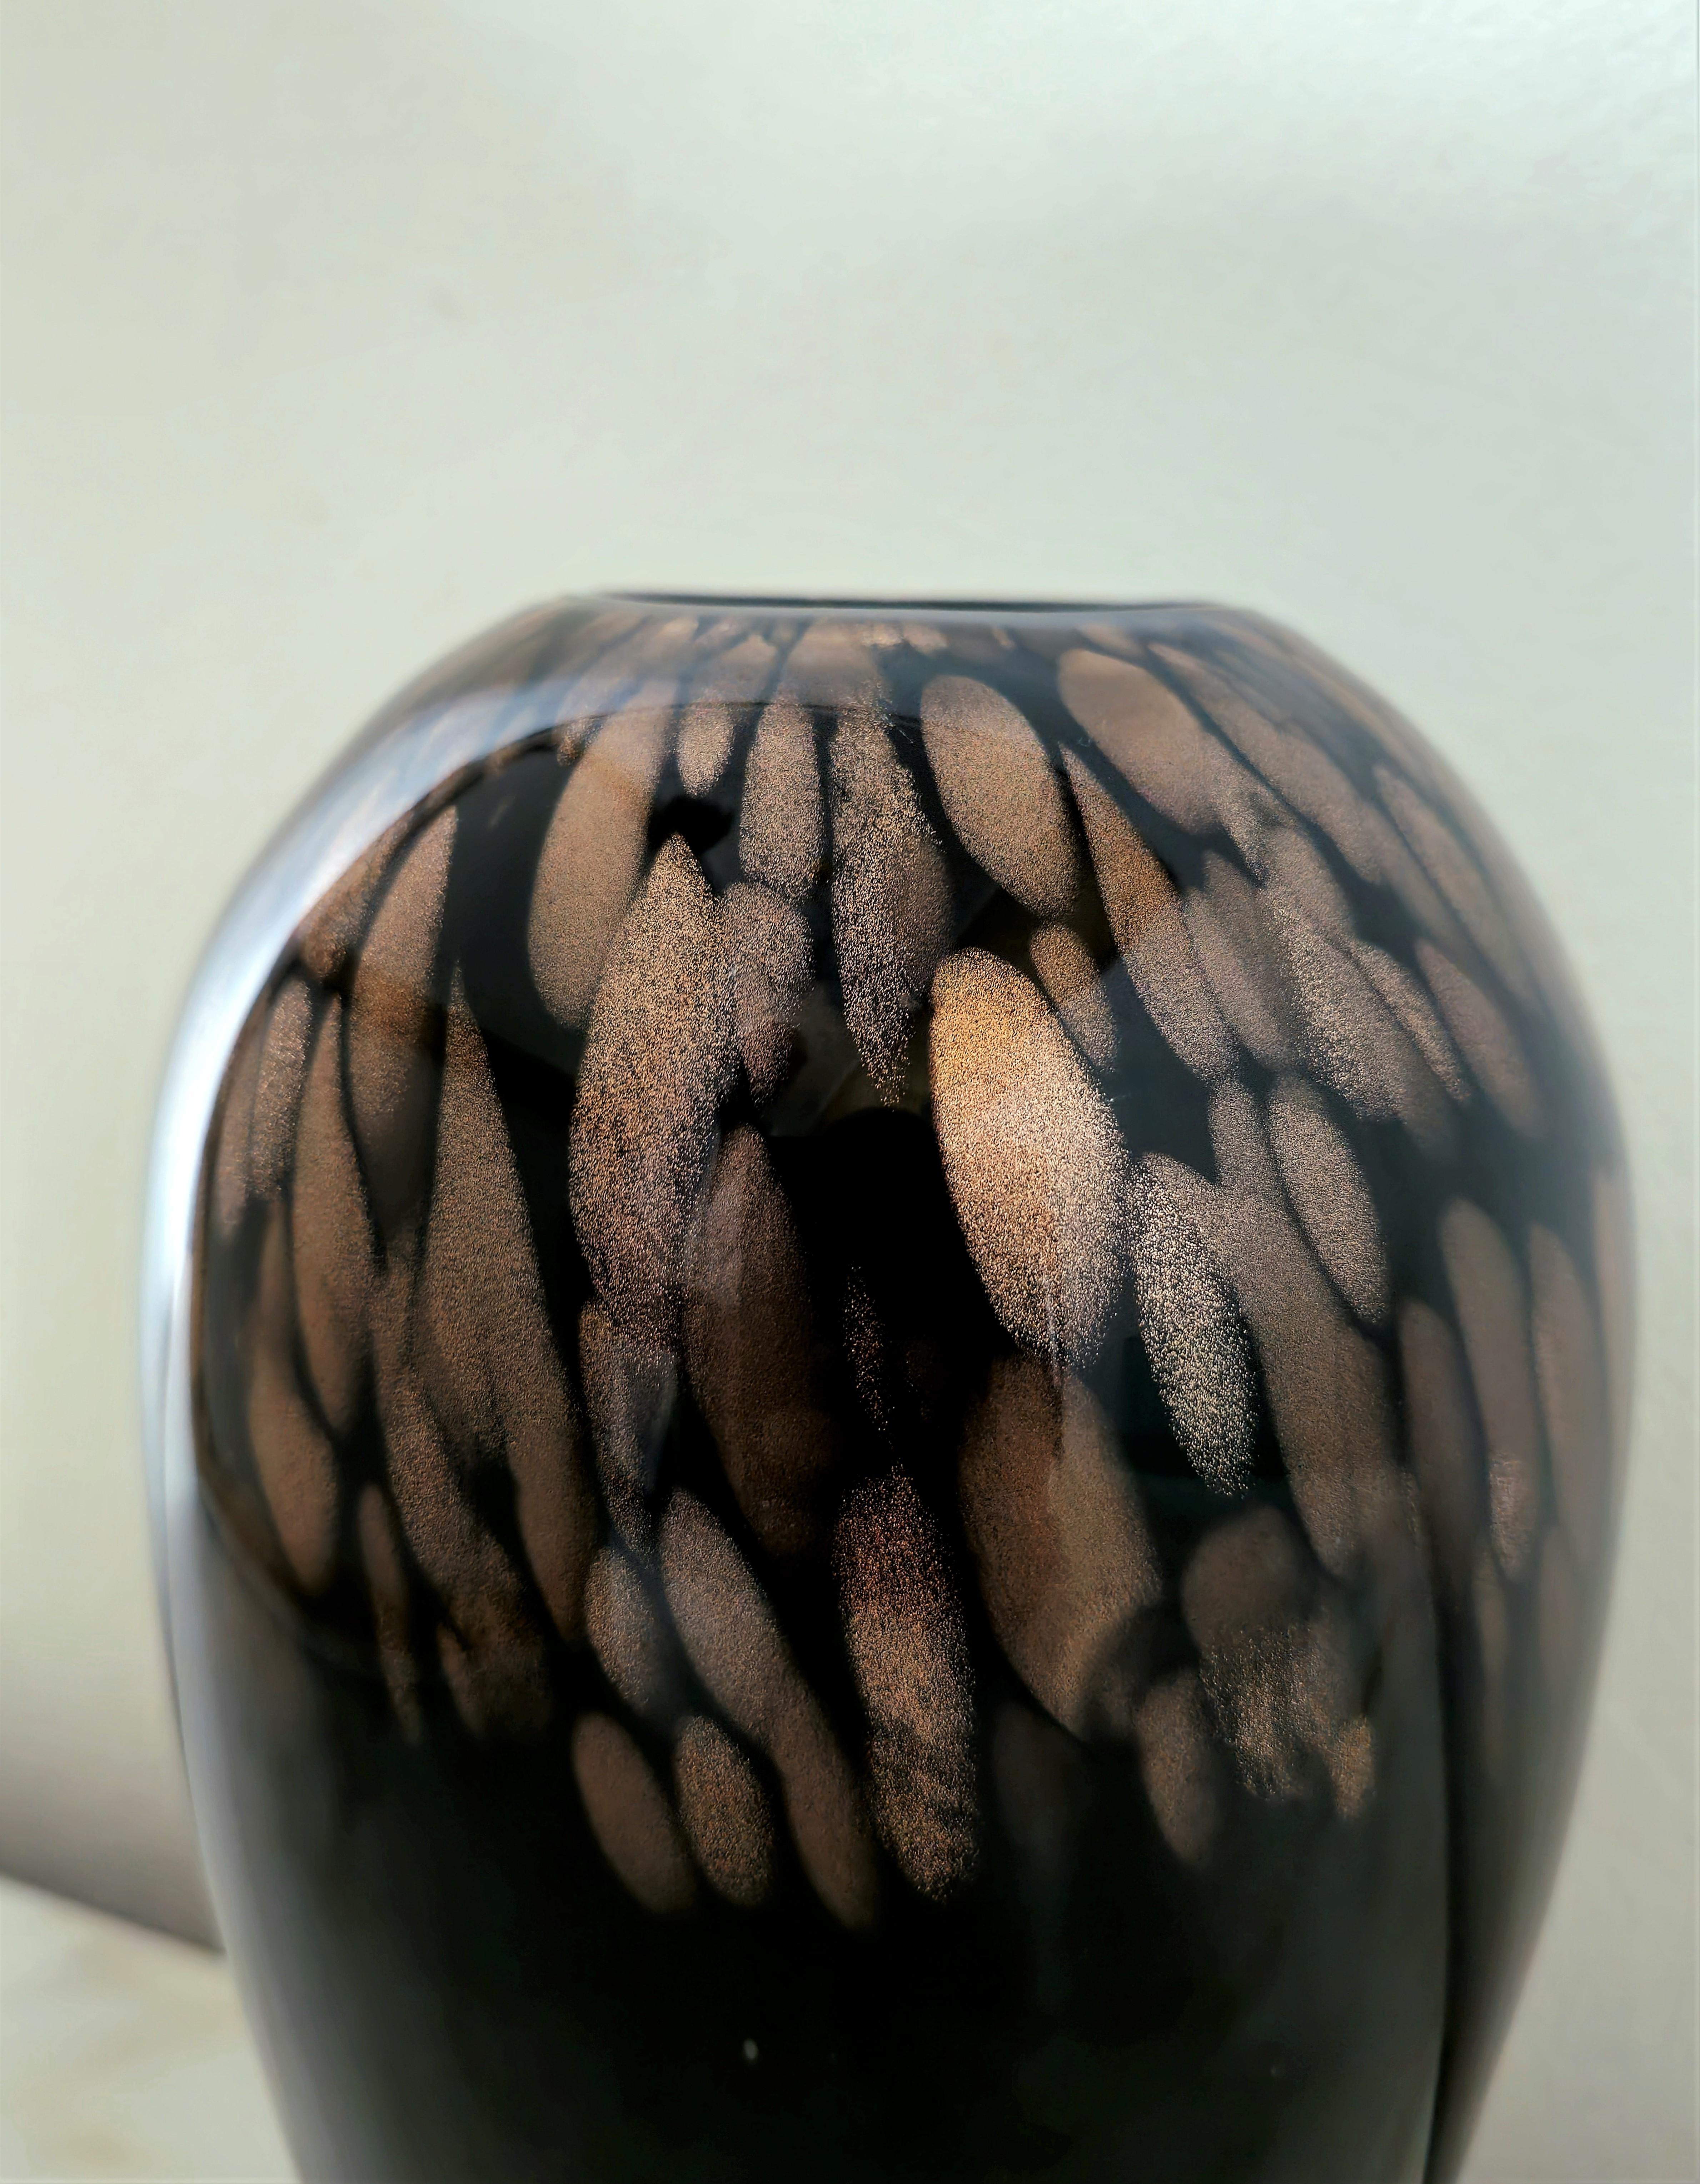 Vase/decorative object attributed to Vincenzo Nason made of black aventurine blown Murano glass with oval body and flat mouth. Made in Murano in the 60s.

Weight: 1820 grams.

Note: We try to offer our customers an excellent service even in